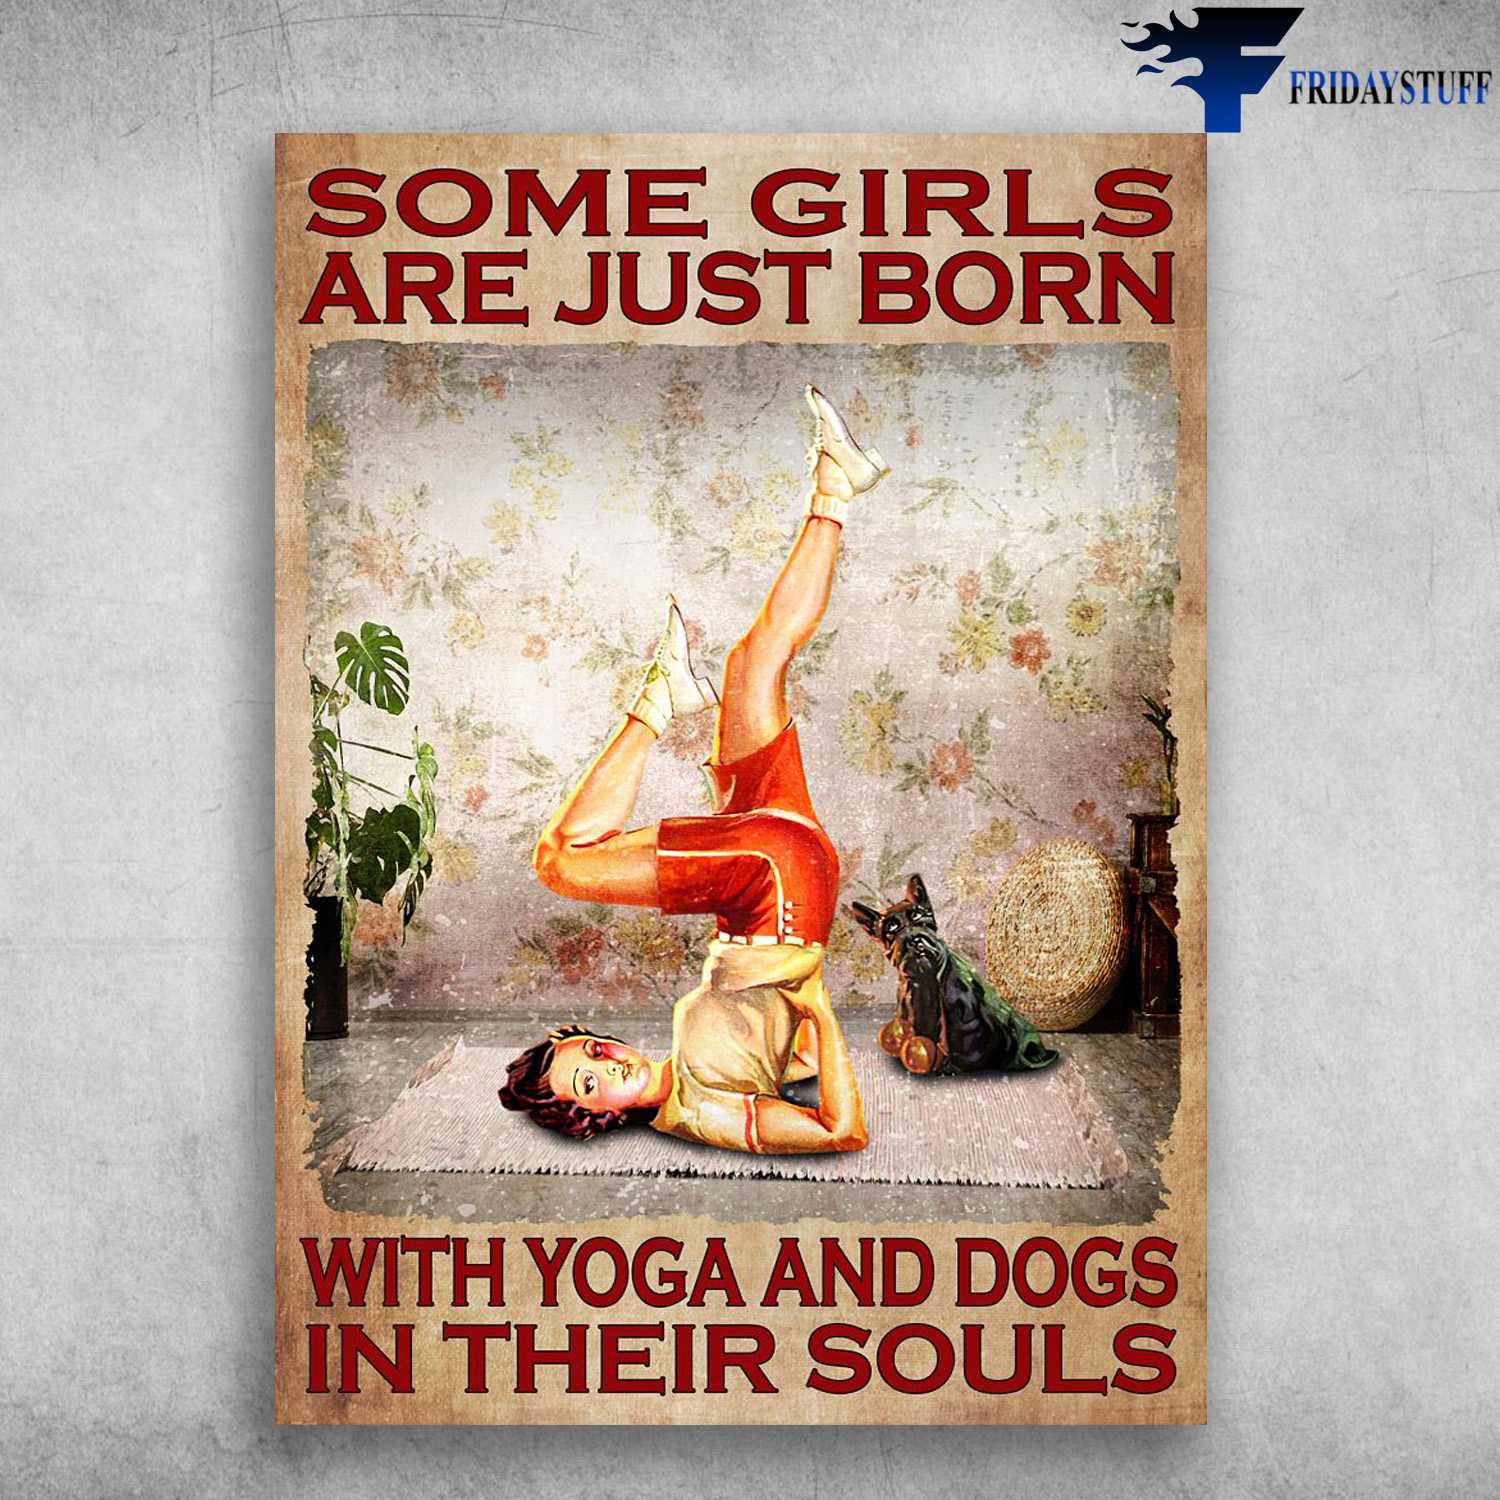 Yoga With Dog, Yoga Poster - Some Girls Are Just Born, With Yoga And Dog, In Their Souls